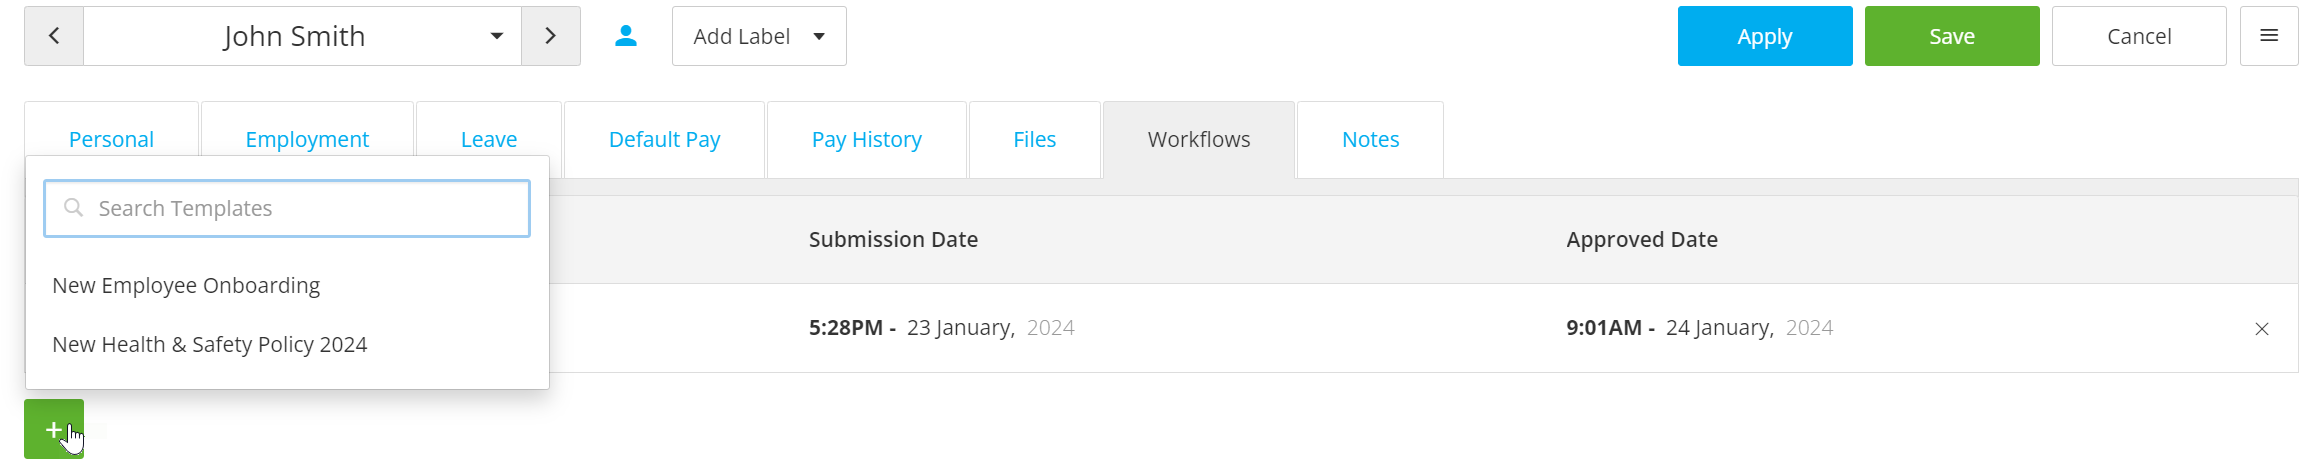 Employees - Workflows - Add Workflow.png